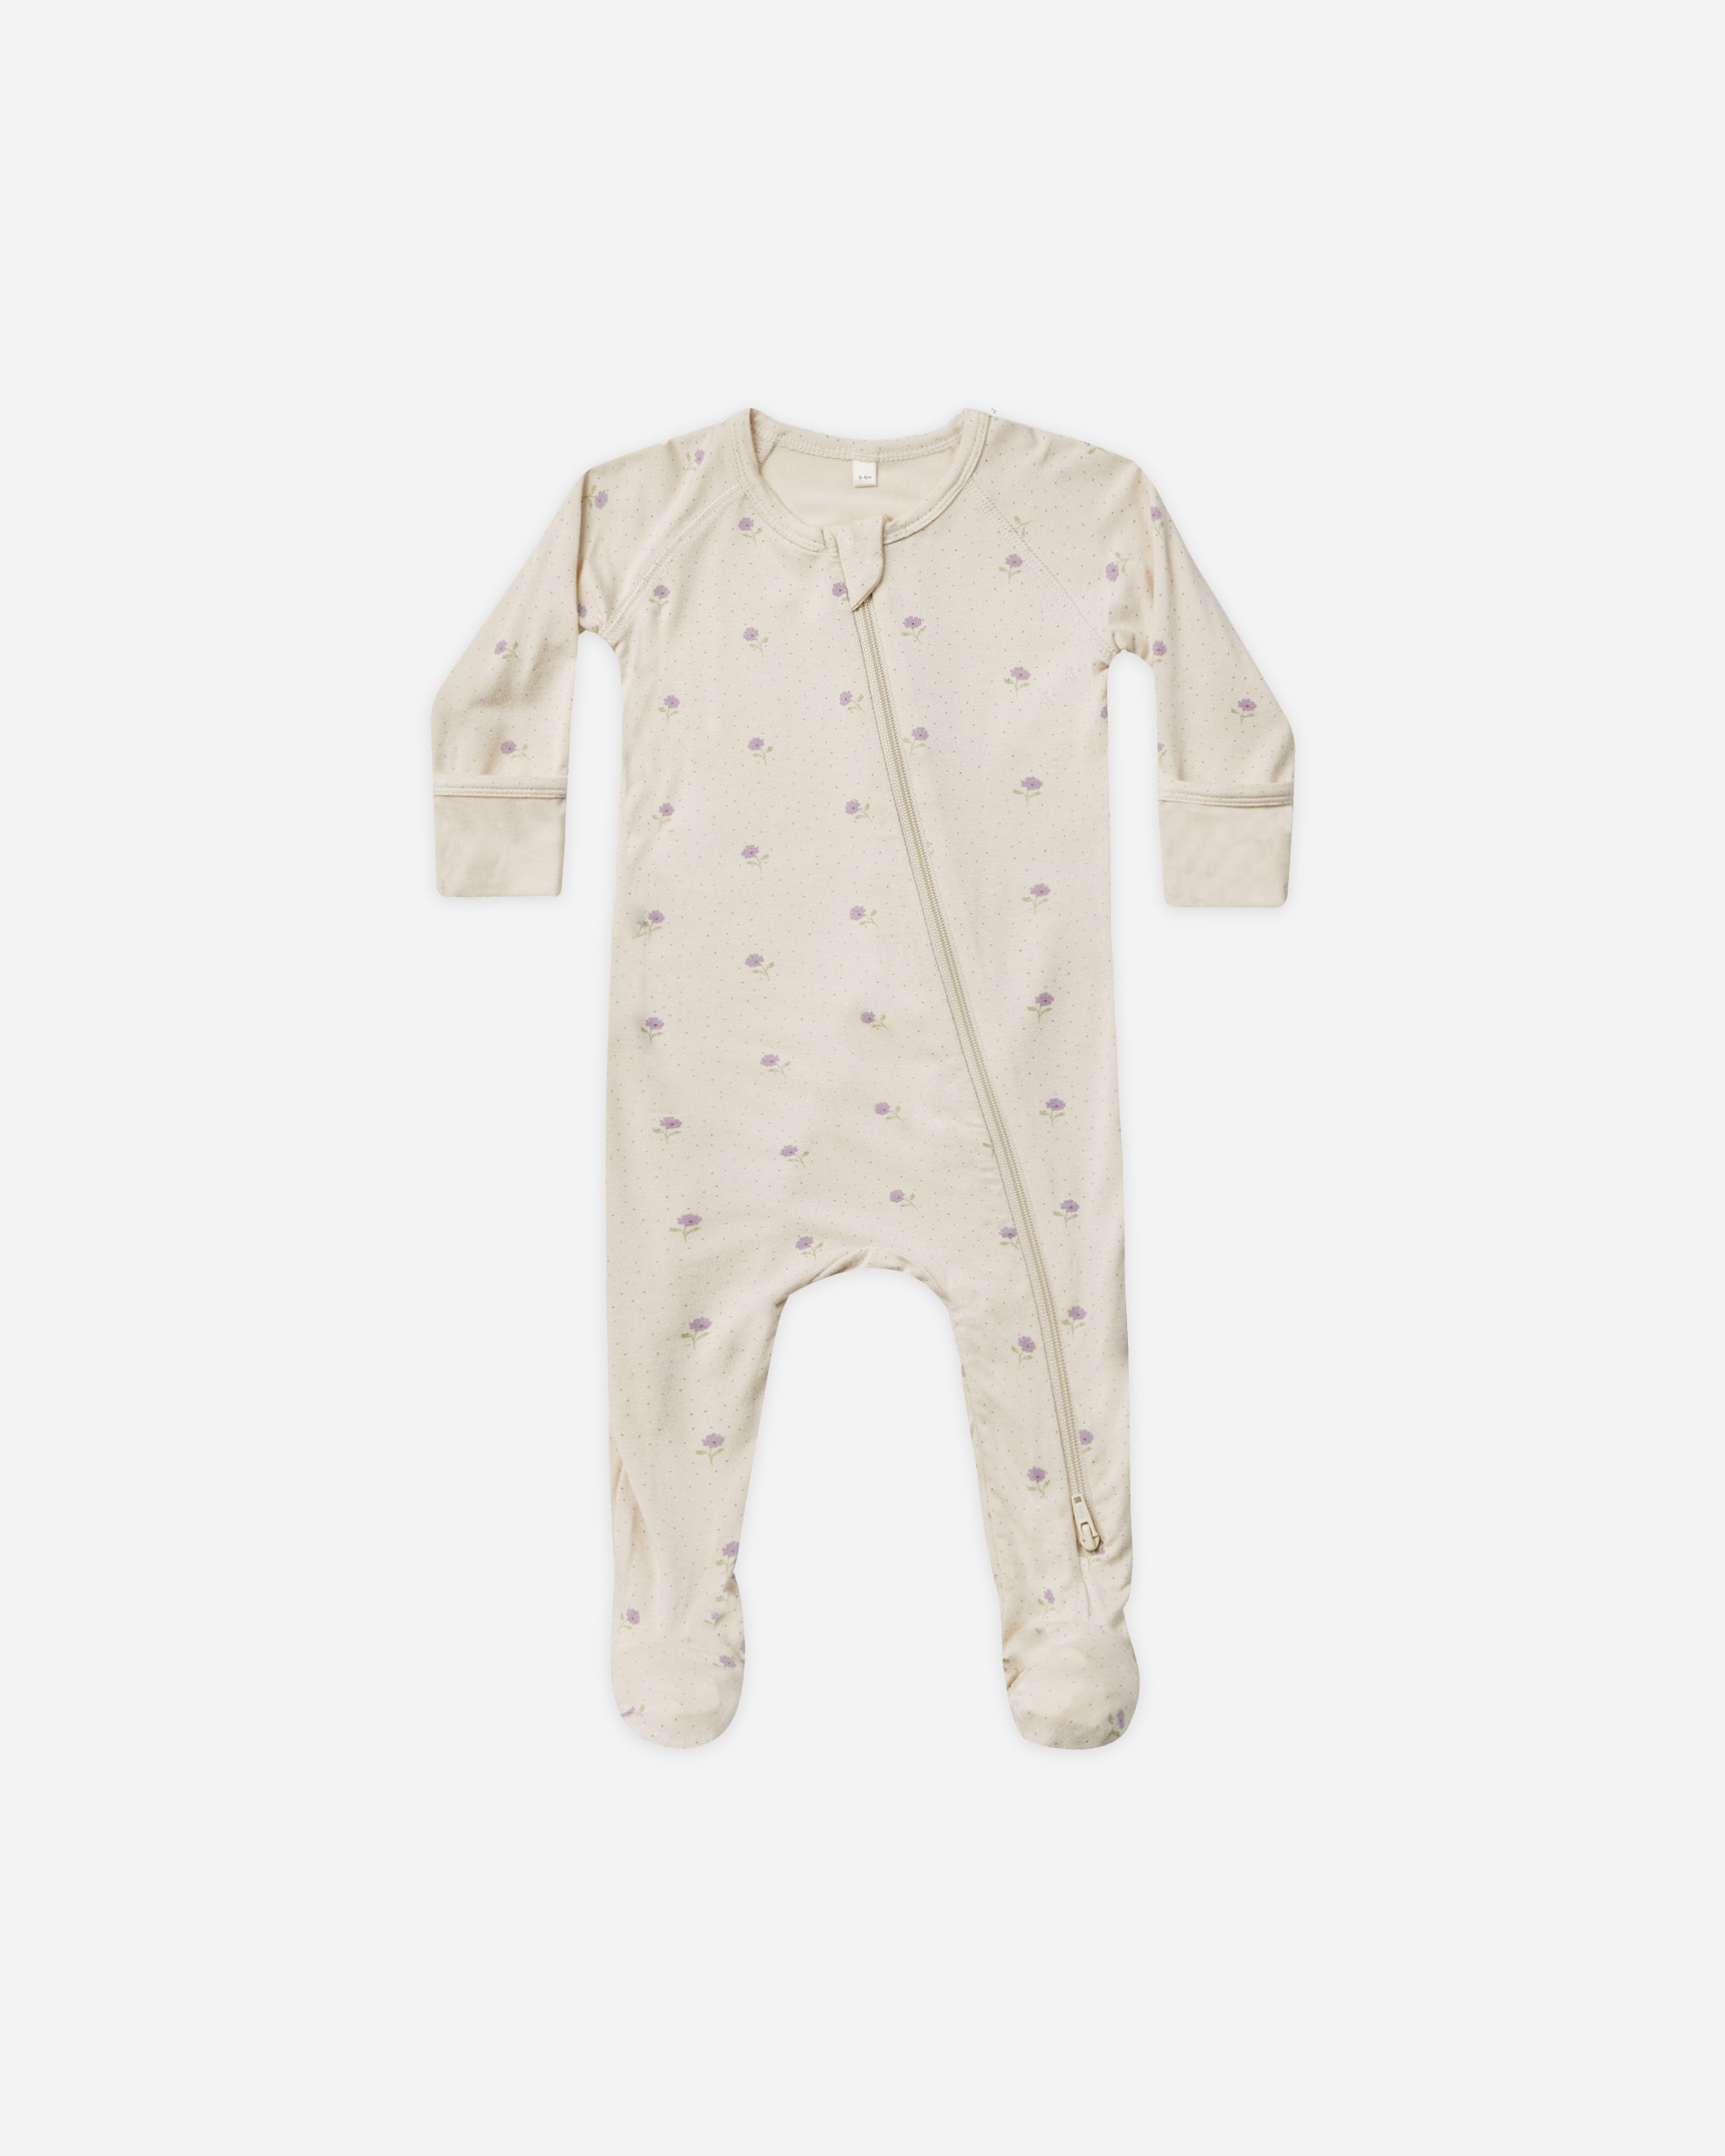 Bamboo Zip Footie || Sweet Pea - Rylee + Cru | Kids Clothes | Trendy Baby Clothes | Modern Infant Outfits |